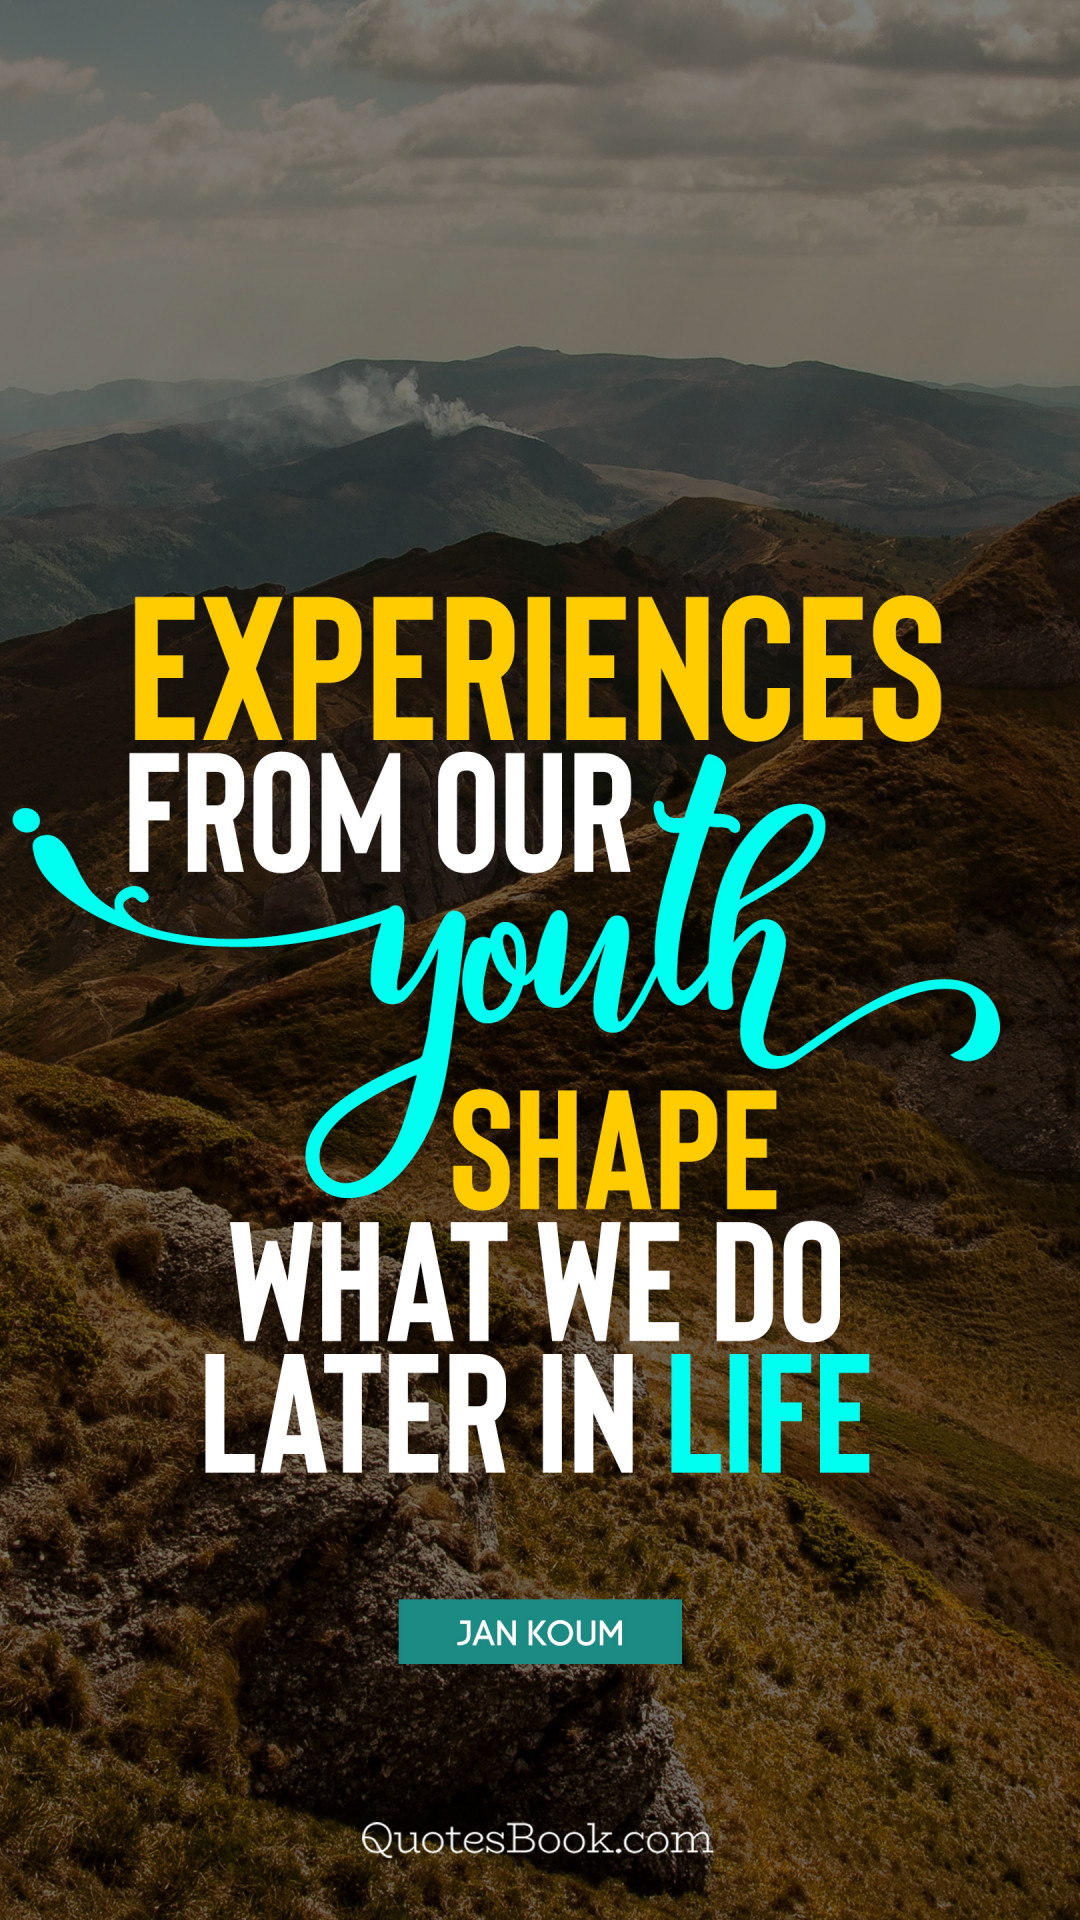 Experiences from our youth shape what we do later in life. - Quote by